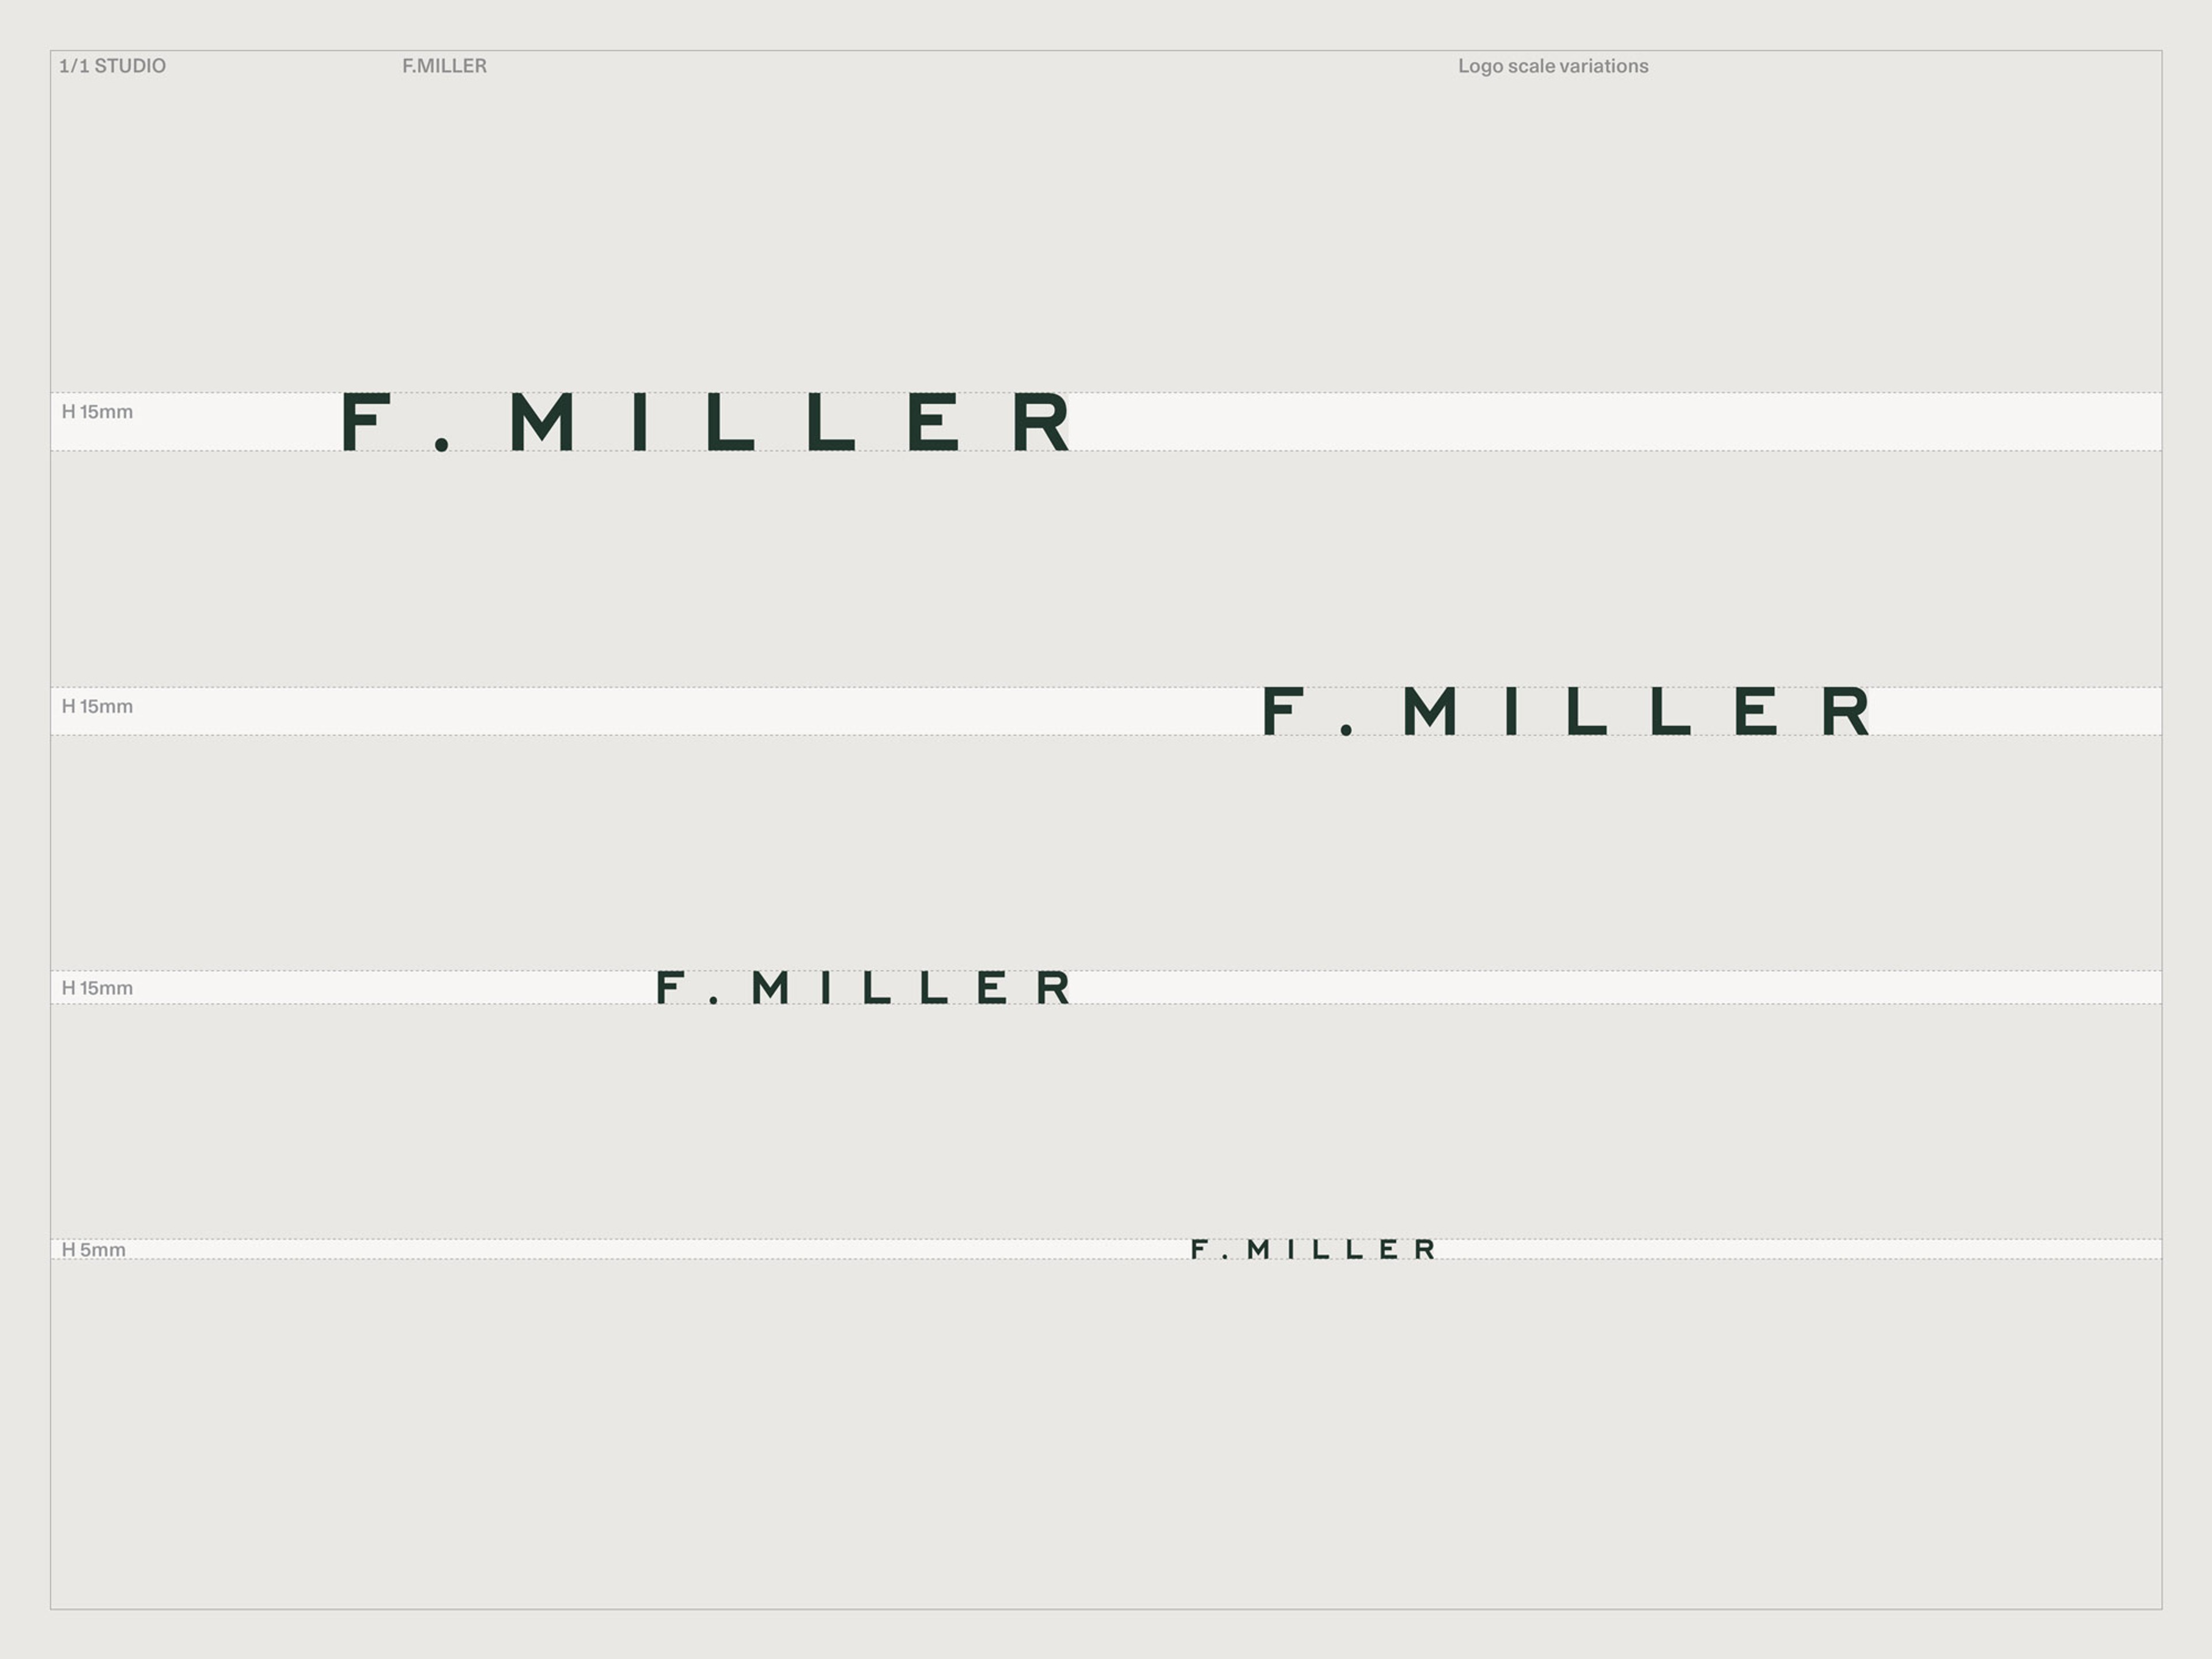  Logotype Scale Variations